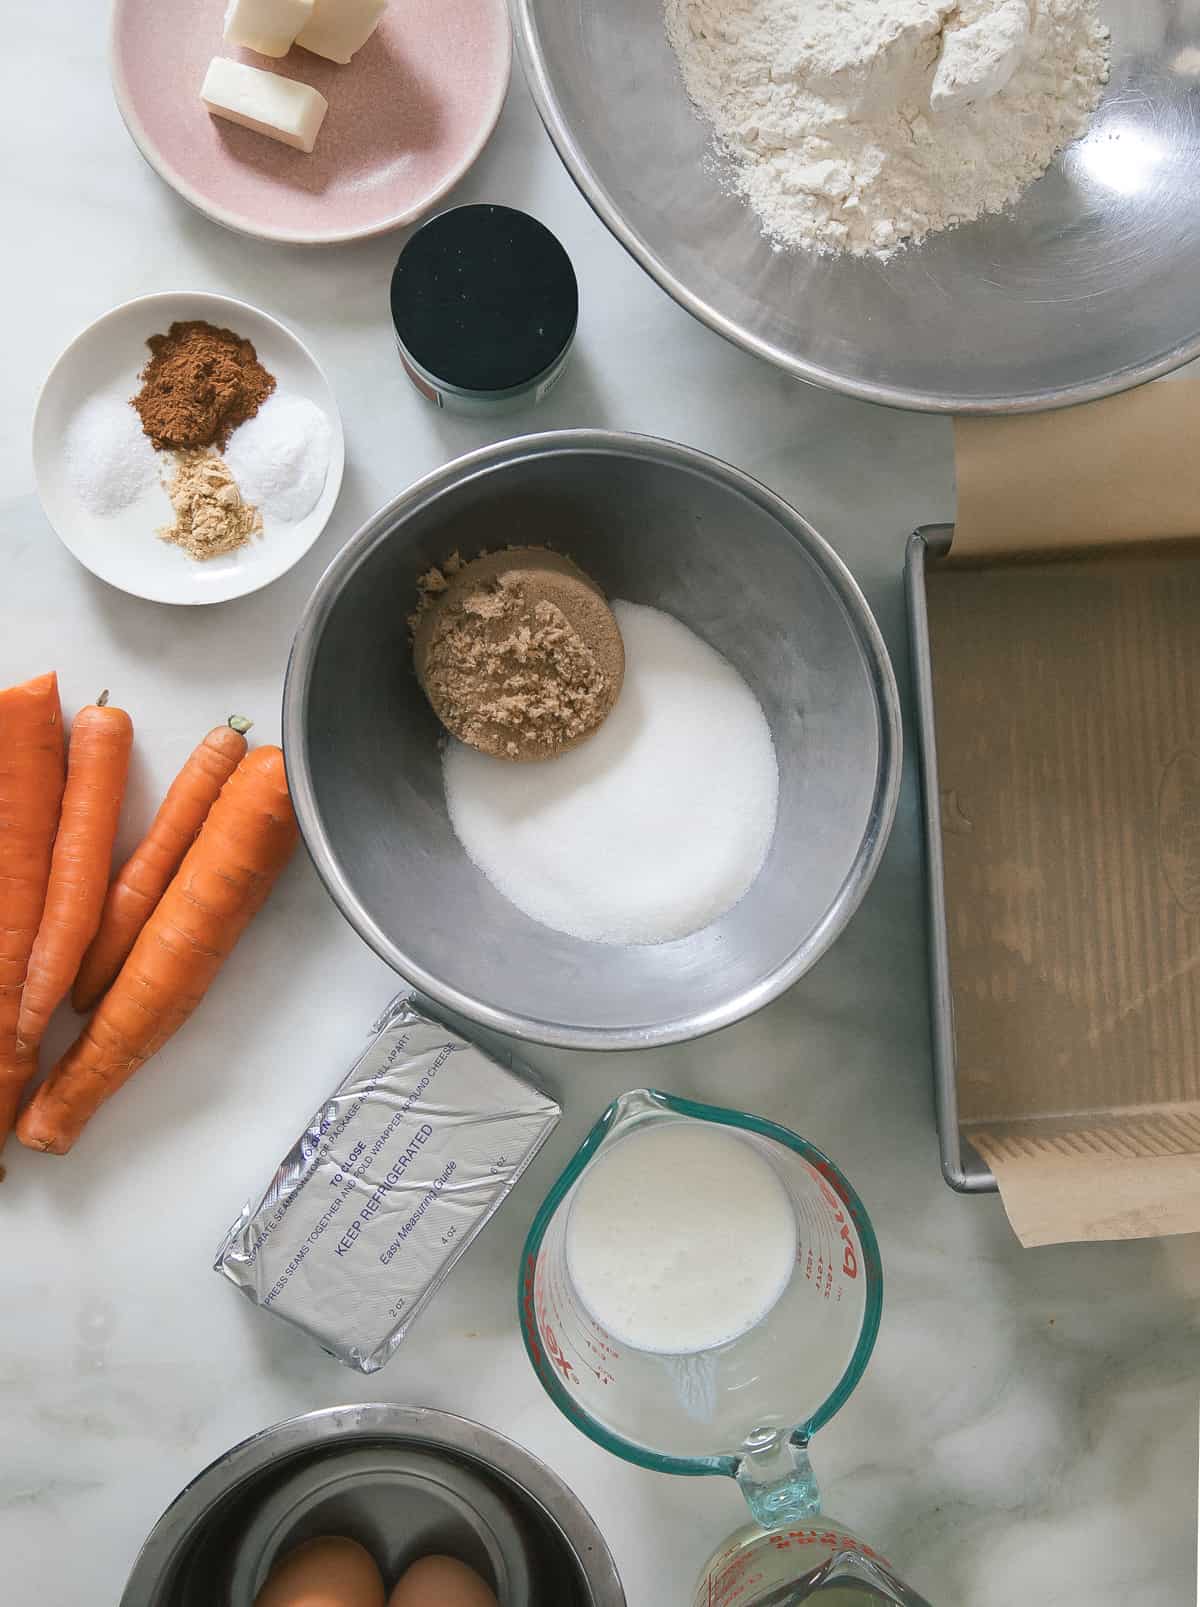 Ingredient shot of flour, spices, sugars, carrots